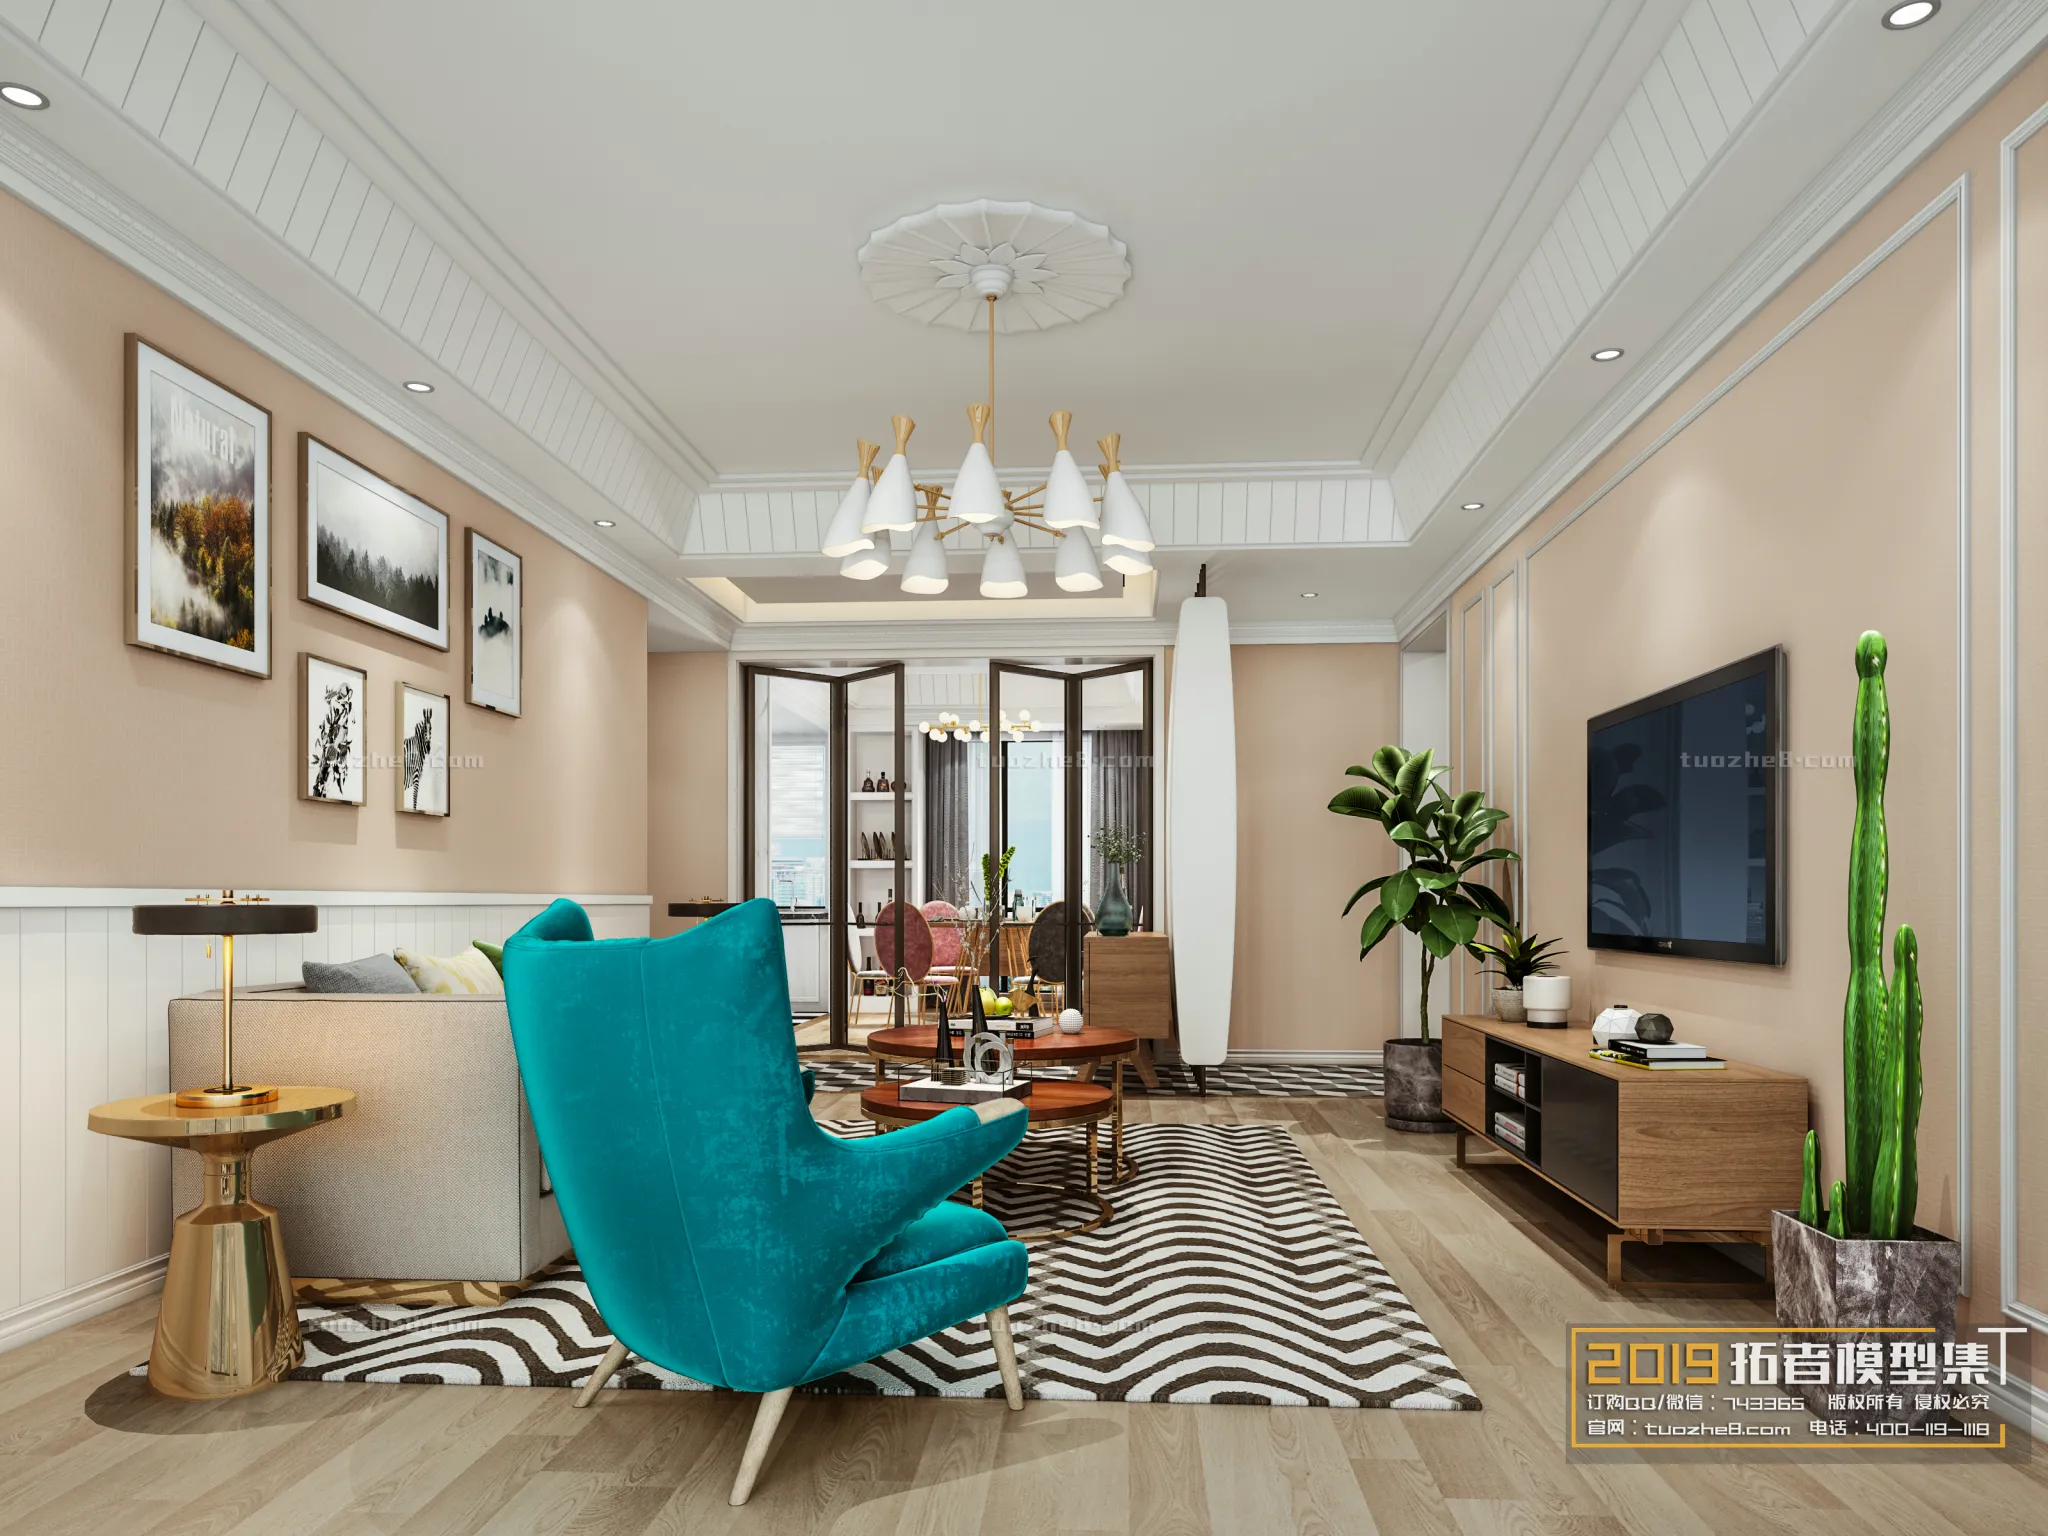 Extension Interior – LINGVING ROOM – NORDIC STYLES – 003